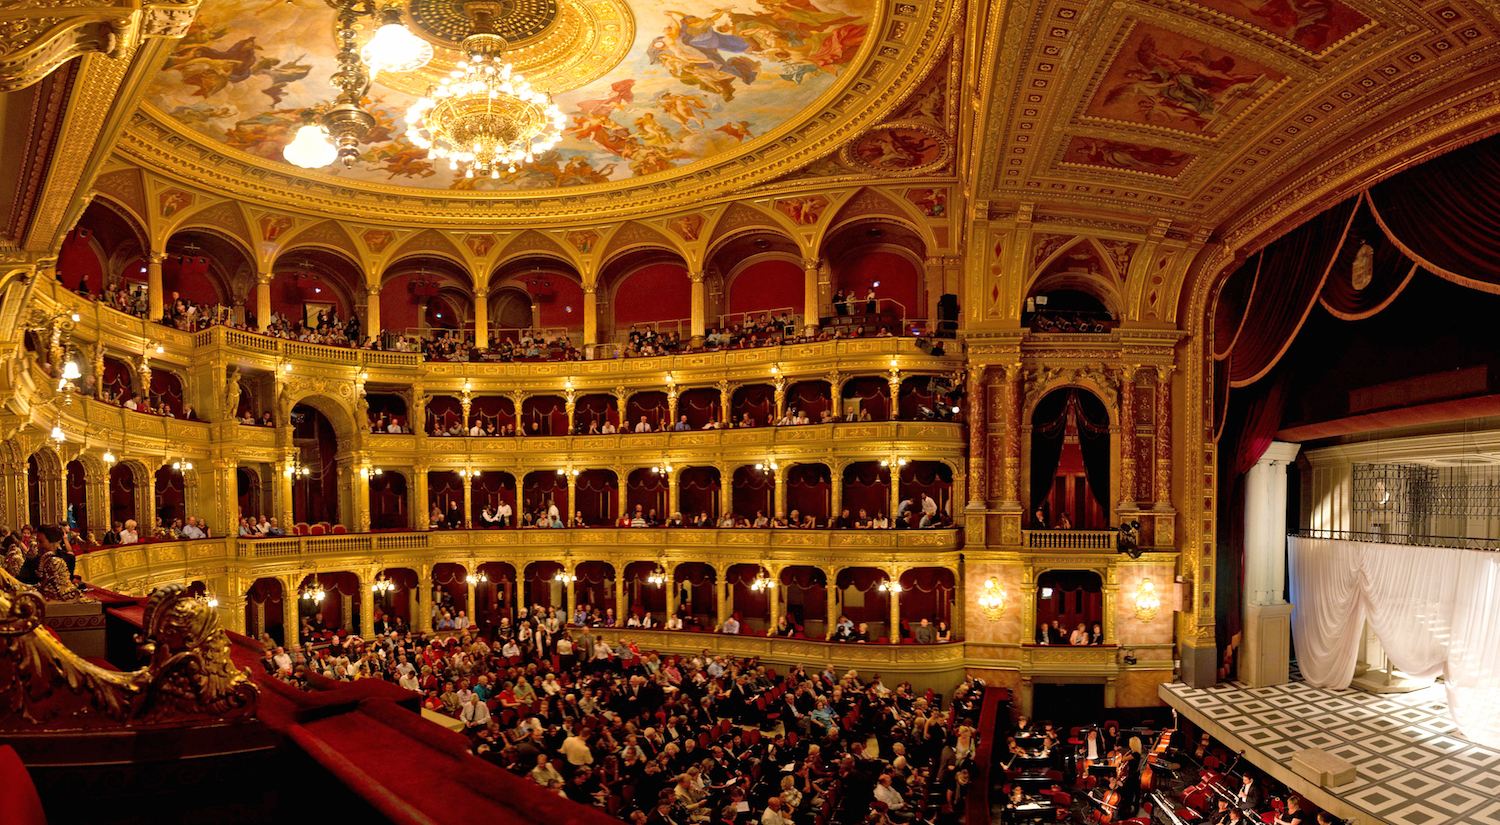 At the Hungarian State Opera House in Budapest, Clements noted that luxury doesn’t have to come with a hefty price tag. A ticket for a box seat to The Nutcracker cost her only $30. 